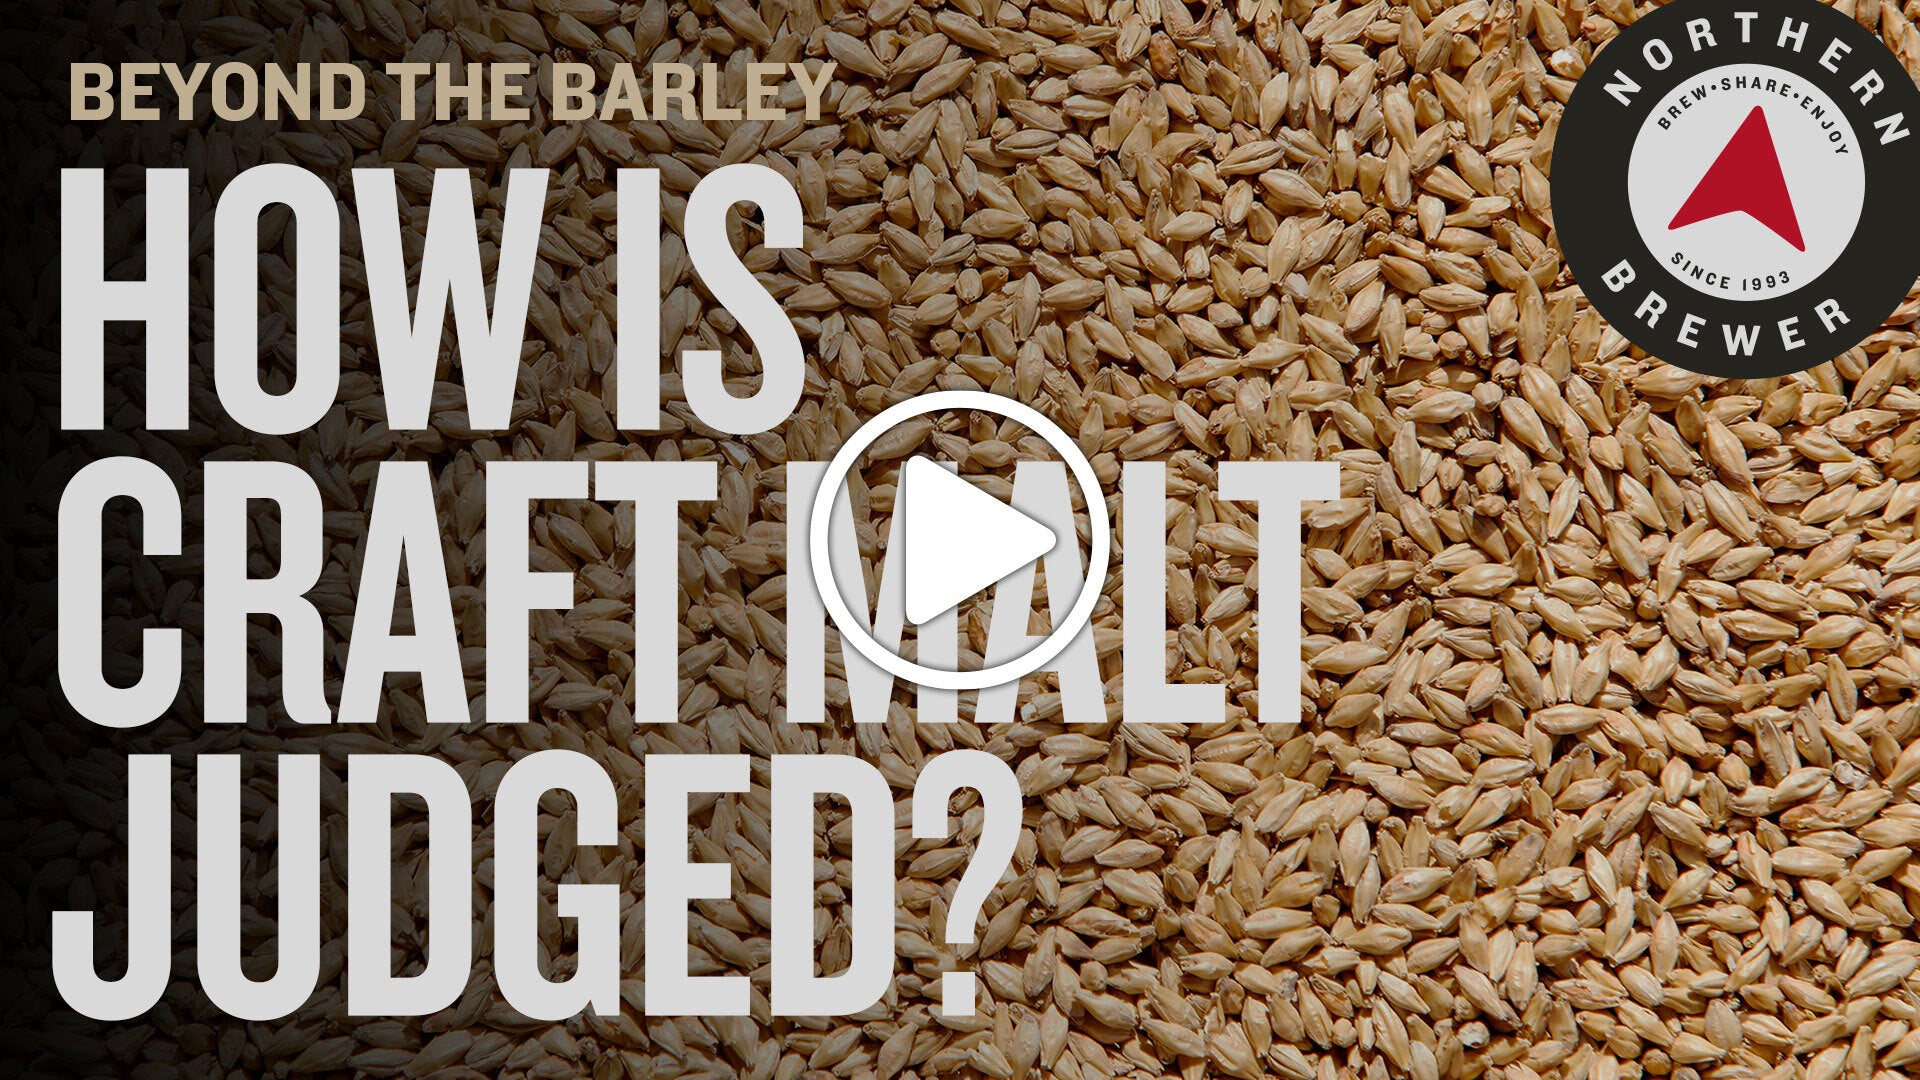 Thumbnail Image to Youtube Video, "How is Craft Malt Judged?"